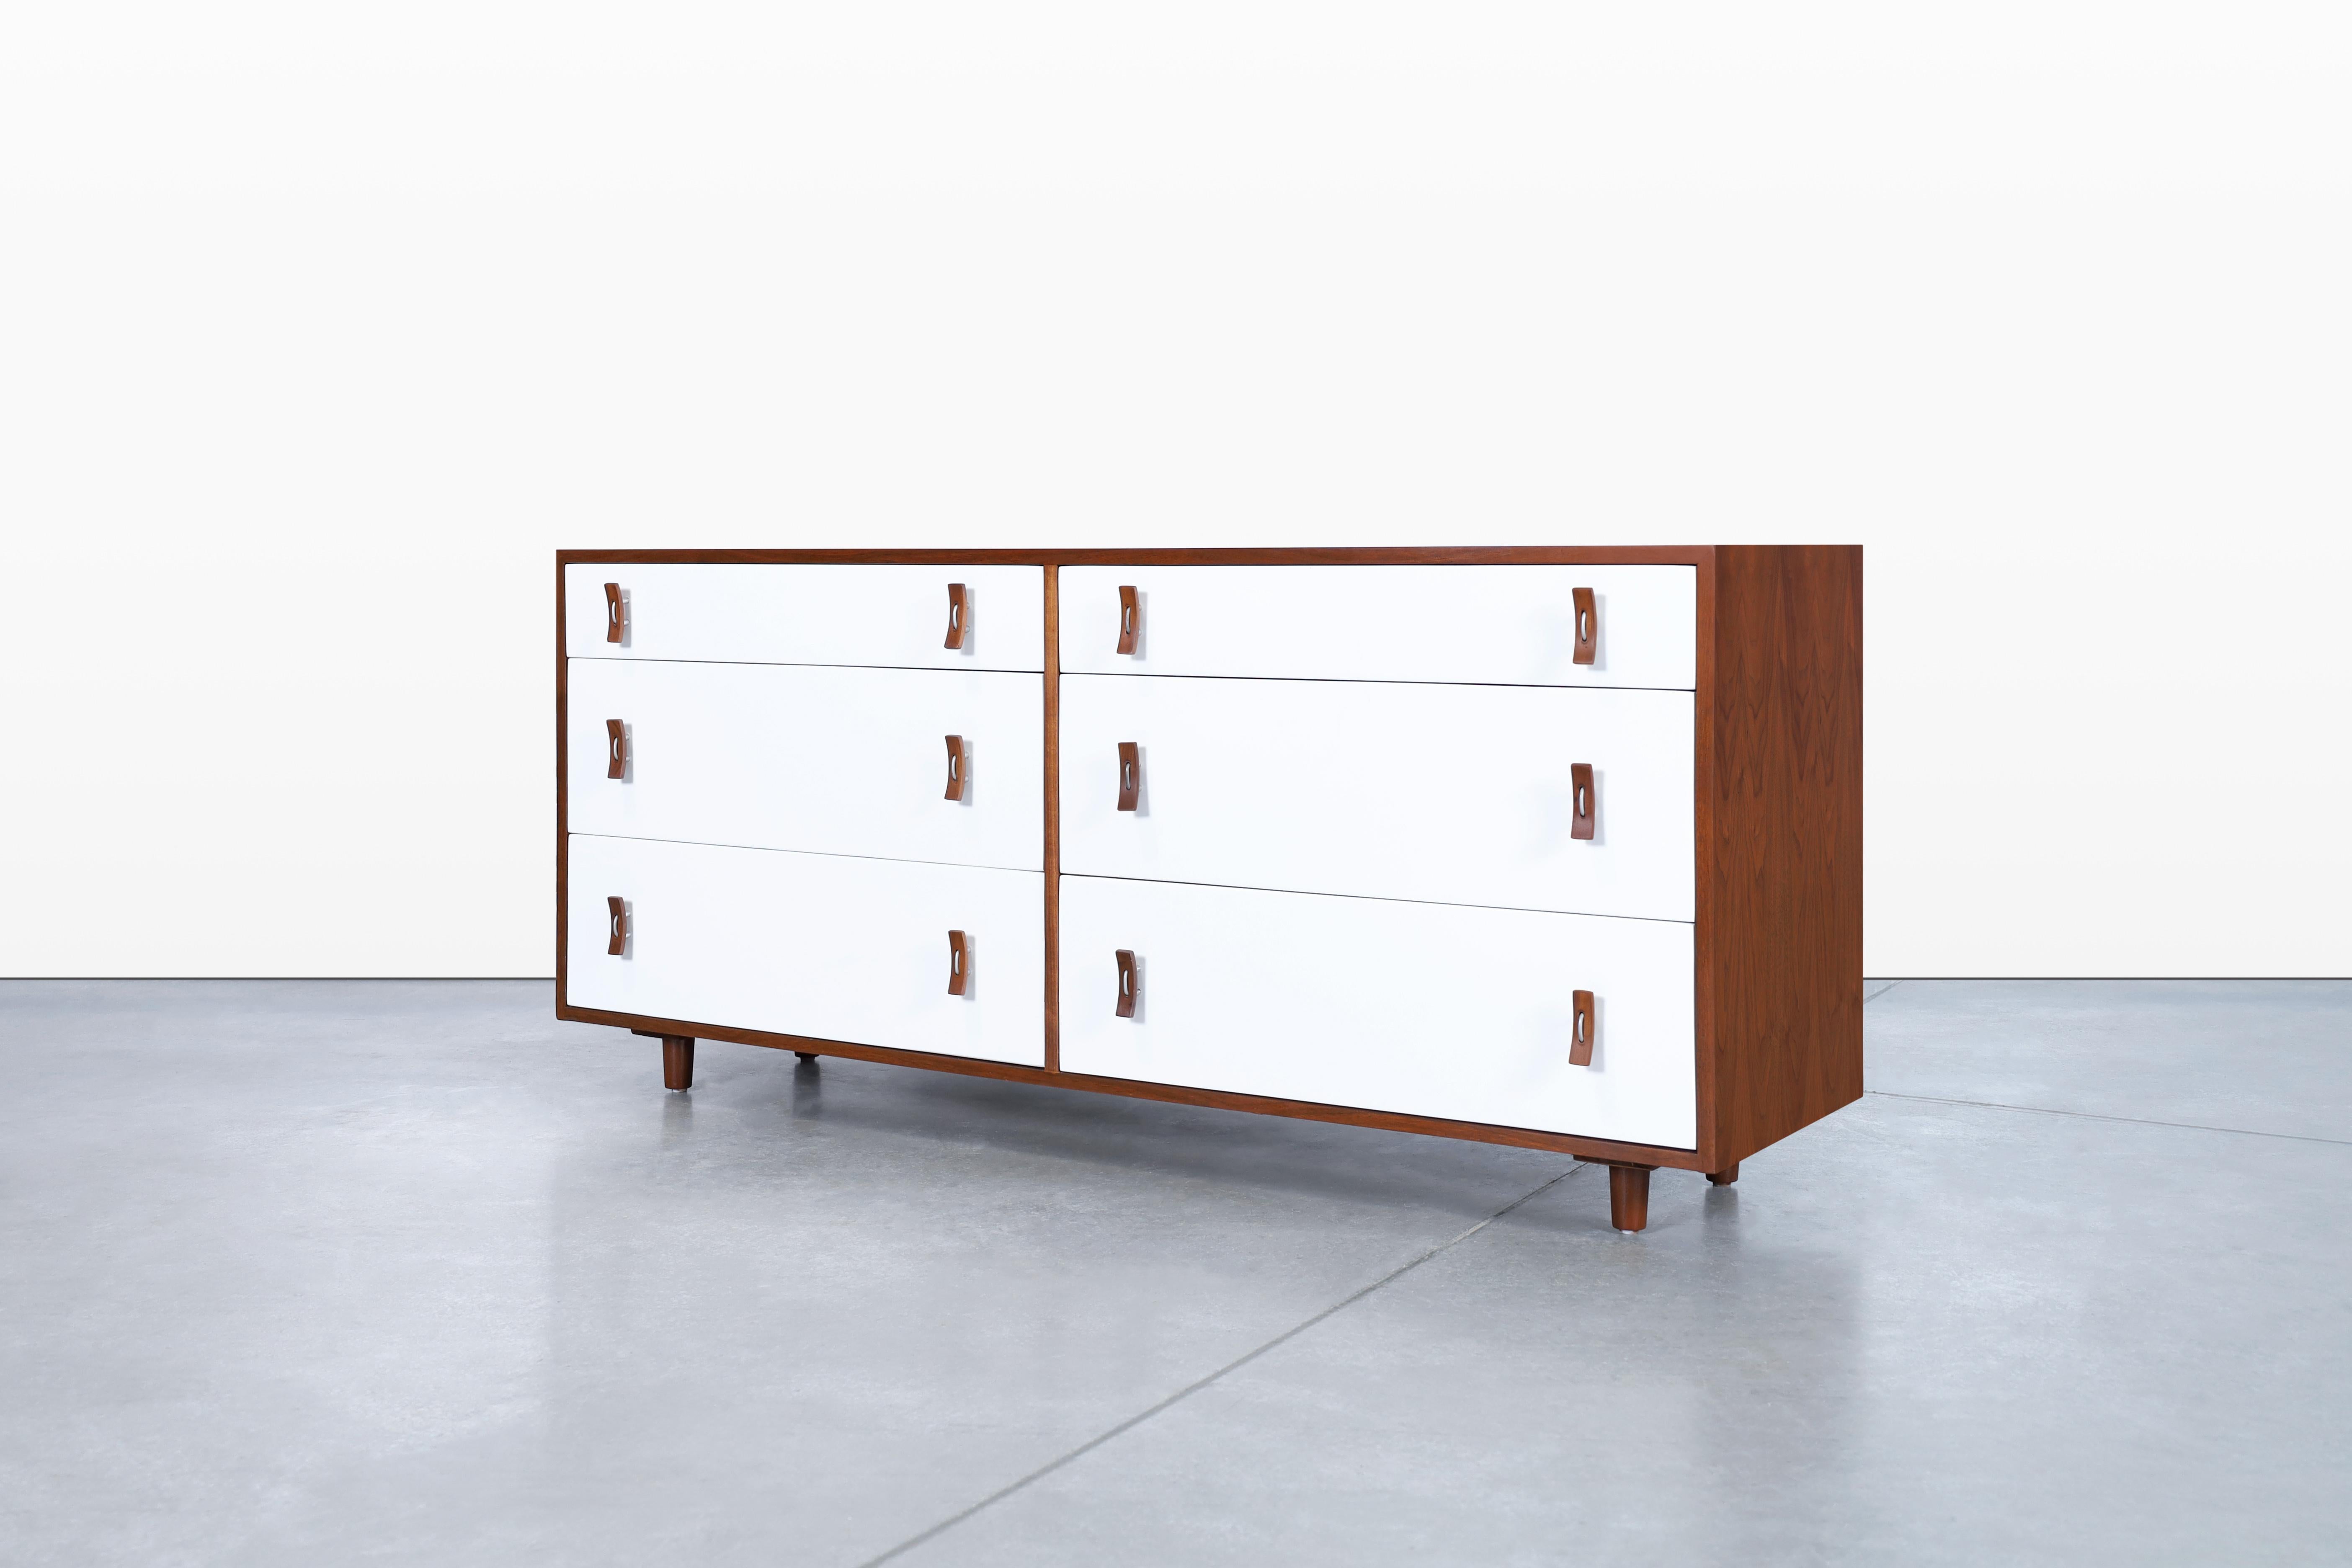 Fabulous vintage walnut and lacquered Dresser by Stanley Young for Glenn of California in the United States, circa 1950s. This dresser has a minimalist but highly functional design, where the elegant contrast of colors stands out. It features six